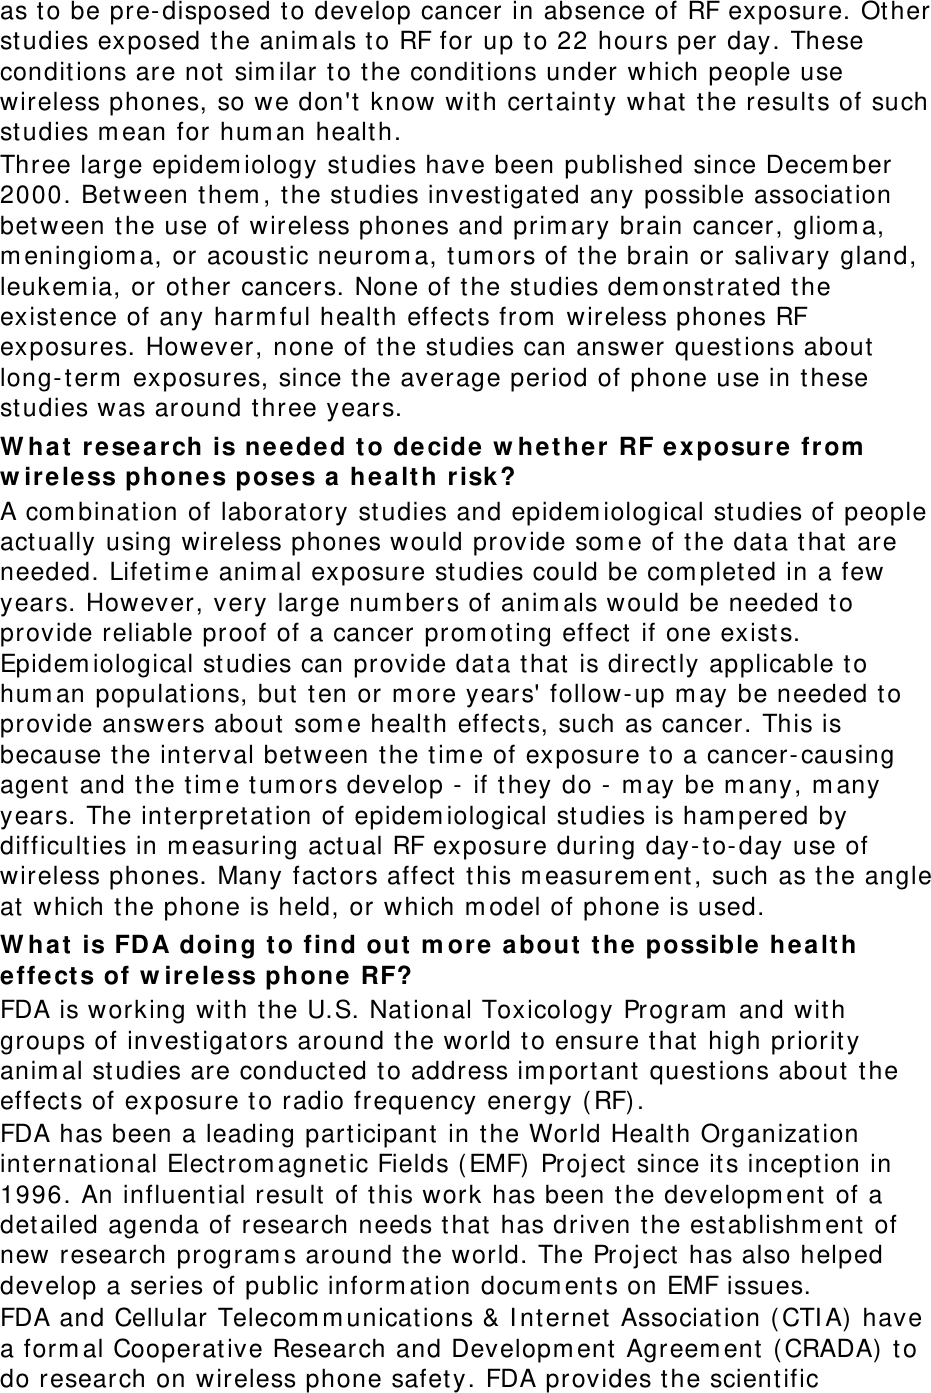 as t o be pre- disposed t o develop cancer in absence of RF exposure. Other studies exposed t he anim als to RF for up t o 22 hours per day. These conditions are not sim ilar t o t he conditions under which people use wireless phones, so we don&apos;t know with certainty what the results of such studies m ean for hum an healt h. Three large epidem iology studies have been published since Decem ber 2000. Bet ween t hem , the studies investigat ed any possible associat ion bet ween t he use of wireless phones and prim ary brain cancer, gliom a, m eningiom a, or acoust ic neurom a, t um ors of t he brain or salivary gland, leukem ia, or other cancers. None of t he st udies dem onstrated t he existence of any harm ful health effect s from  wireless phones RF exposures. However, none of t he studies can answer quest ions about long- t erm  exposures, since t he average period of phone use in t hese studies was around three years. W ha t  resea r ch is neede d t o de cide w het he r  RF e x posure fr om  w ireless phones pose s a healt h risk ? A com bination of laboratory st udies and epidem iological studies of people act ually using wireless phones would provide som e of t he dat a that are needed. Lifet im e anim al exposure st udies could be com pleted in a few years. However, very large num bers of anim als would be needed t o provide reliable proof of a cancer prom oting effect  if one exist s. Epidem iological st udies can provide data that is direct ly applicable to hum an populat ions, but  t en or m ore years&apos; follow- up m ay be needed t o provide answers about som e health effect s, such as cancer. This is because the interval bet ween t he tim e of exposure t o a cancer- causing agent  and t he tim e t um ors develop -  if t hey do -  m ay be m any, m any years. The int erpretation of epidem iological studies is ham pered by difficulties in m easuring act ual RF exposure during day- to-day use of wireless phones. Many fact ors affect  t his m easurem ent , such as t he angle at  which t he phone is held, or which m odel of phone is used. W ha t  is FD A doing t o find out  m ore abou t  t he possible  hea lt h effect s of w ireless phone RF? FDA is working with t he U.S. National Toxicology Program  and with groups of invest igat ors around t he world to ensure t hat high priorit y anim al st udies are conducted t o address im port ant  quest ions about t he effect s of exposure to radio frequency energy ( RF). FDA has been a leading part icipant  in t he World Health Organizat ion international Elect rom agnetic Fields ( EMF)  Proj ect  since its inception in 1996. An influential result of t his work has been t he developm ent  of a det ailed agenda of research needs t hat has driven t he establishm ent of new research program s around the world. The Project  has also helped develop a series of public inform ation docum ents on EMF issues. FDA and Cellular Telecom m unications &amp; I nt ernet Association ( CTI A)  have a form al Cooperative Research and Developm ent  Agreem ent  ( CRADA)  t o do research on wireless phone safet y. FDA provides t he scient ific 